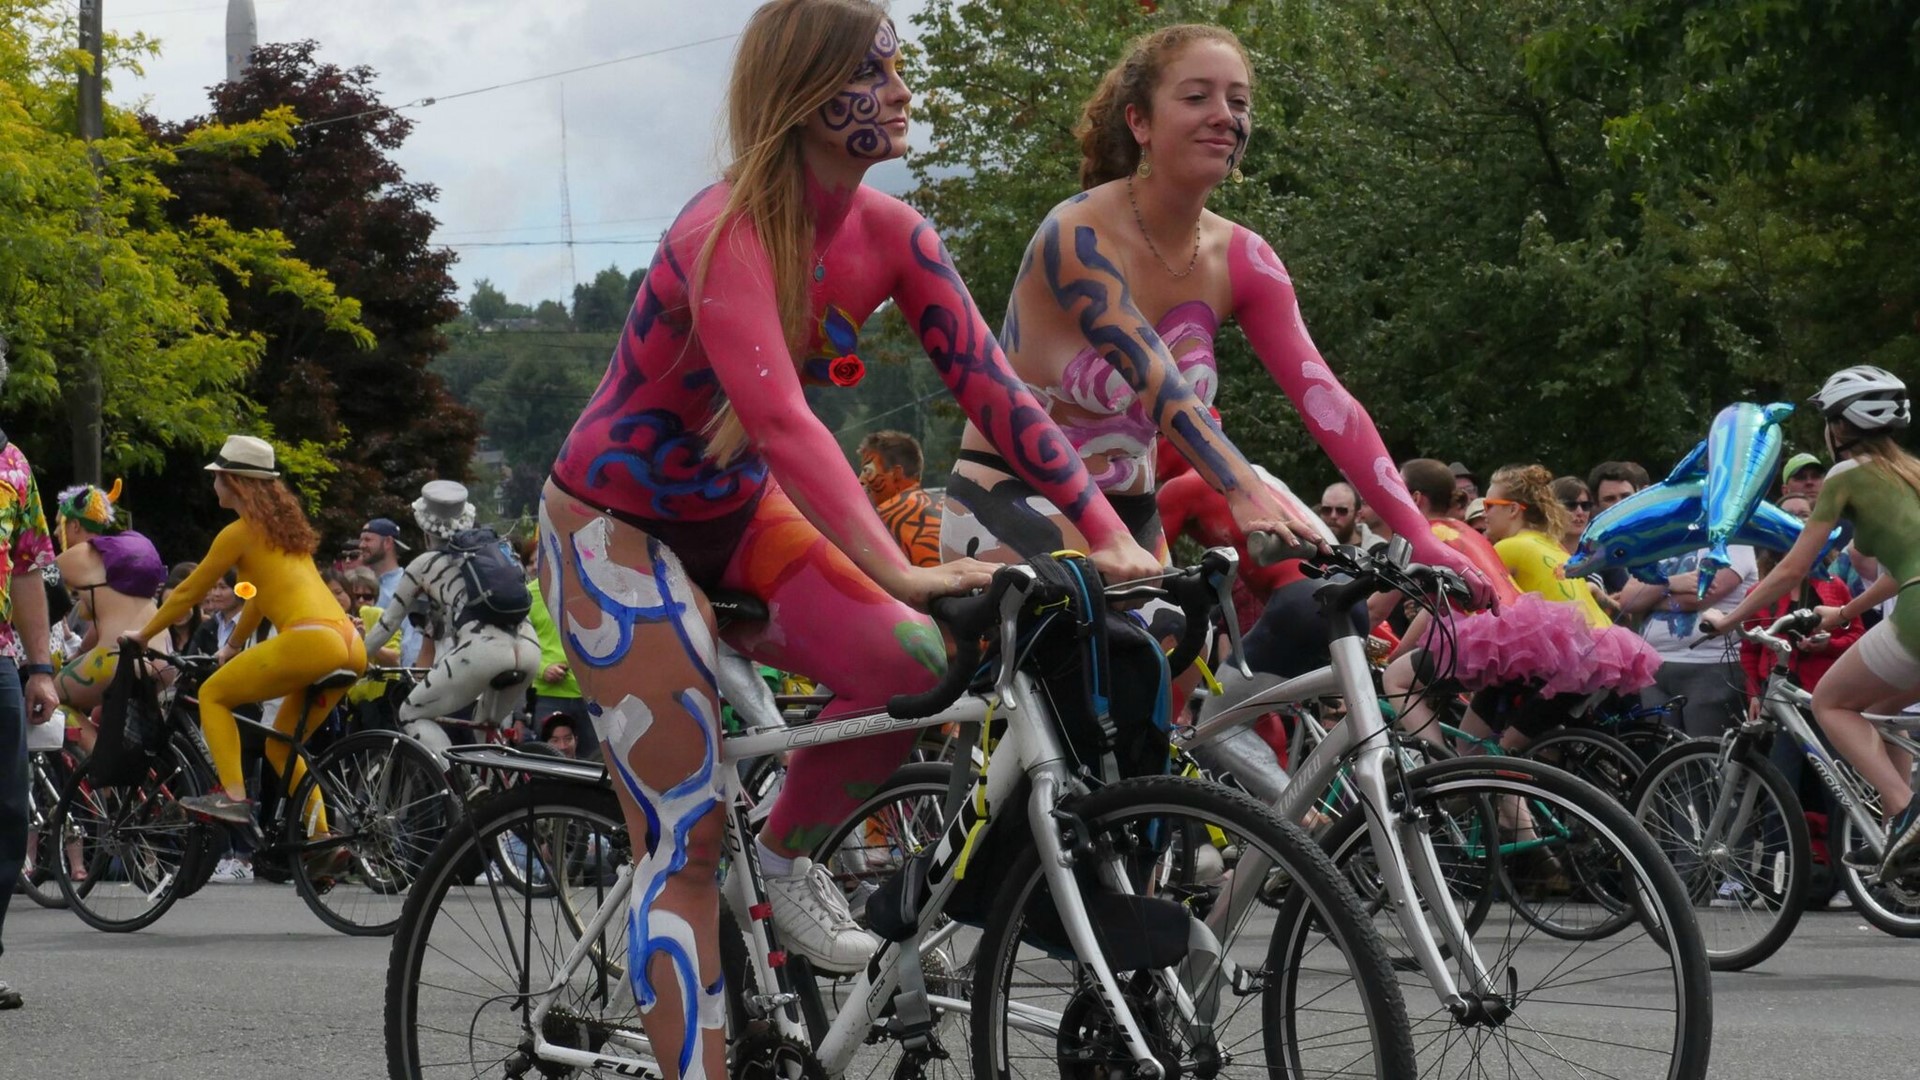 The Fremont Solstice Cyclists ride (2016)